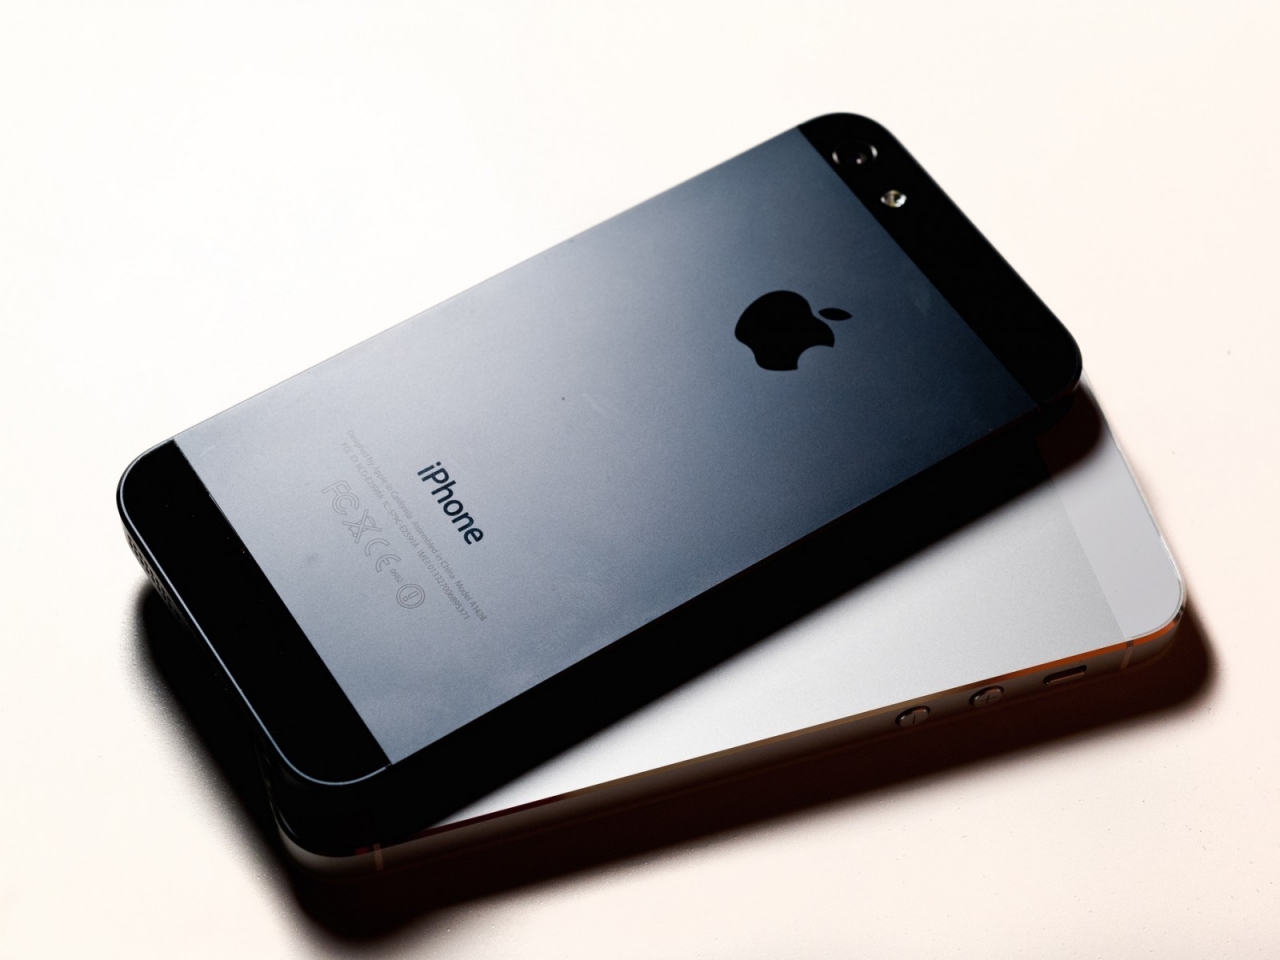 iPhone 5 Rear for 1280 x 960 resolution